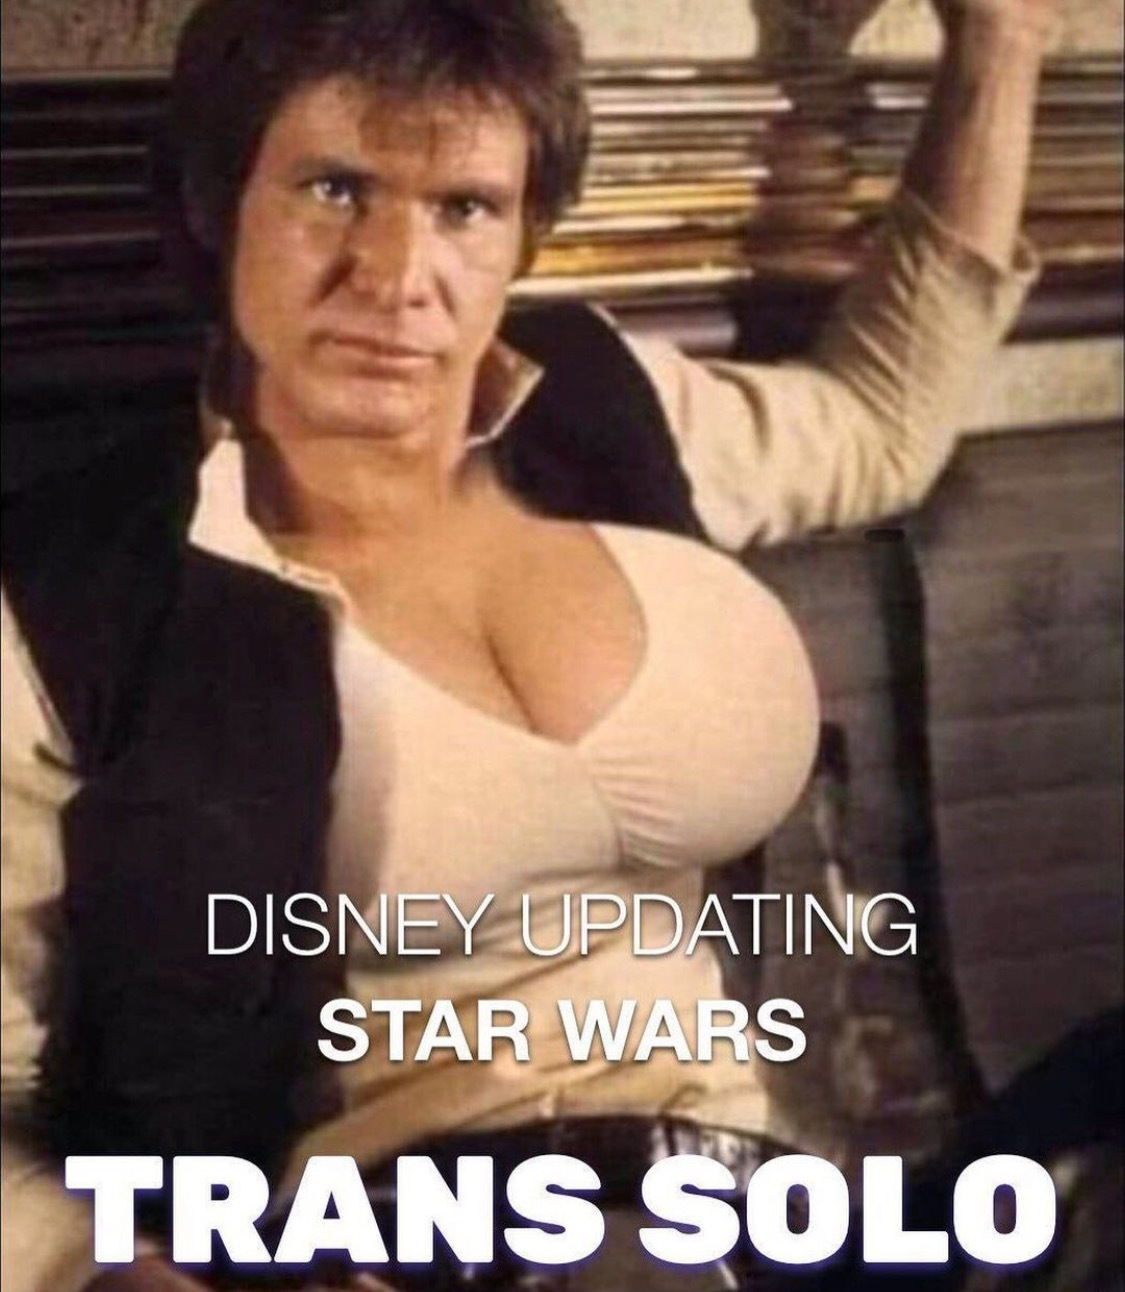 tans_solo.png